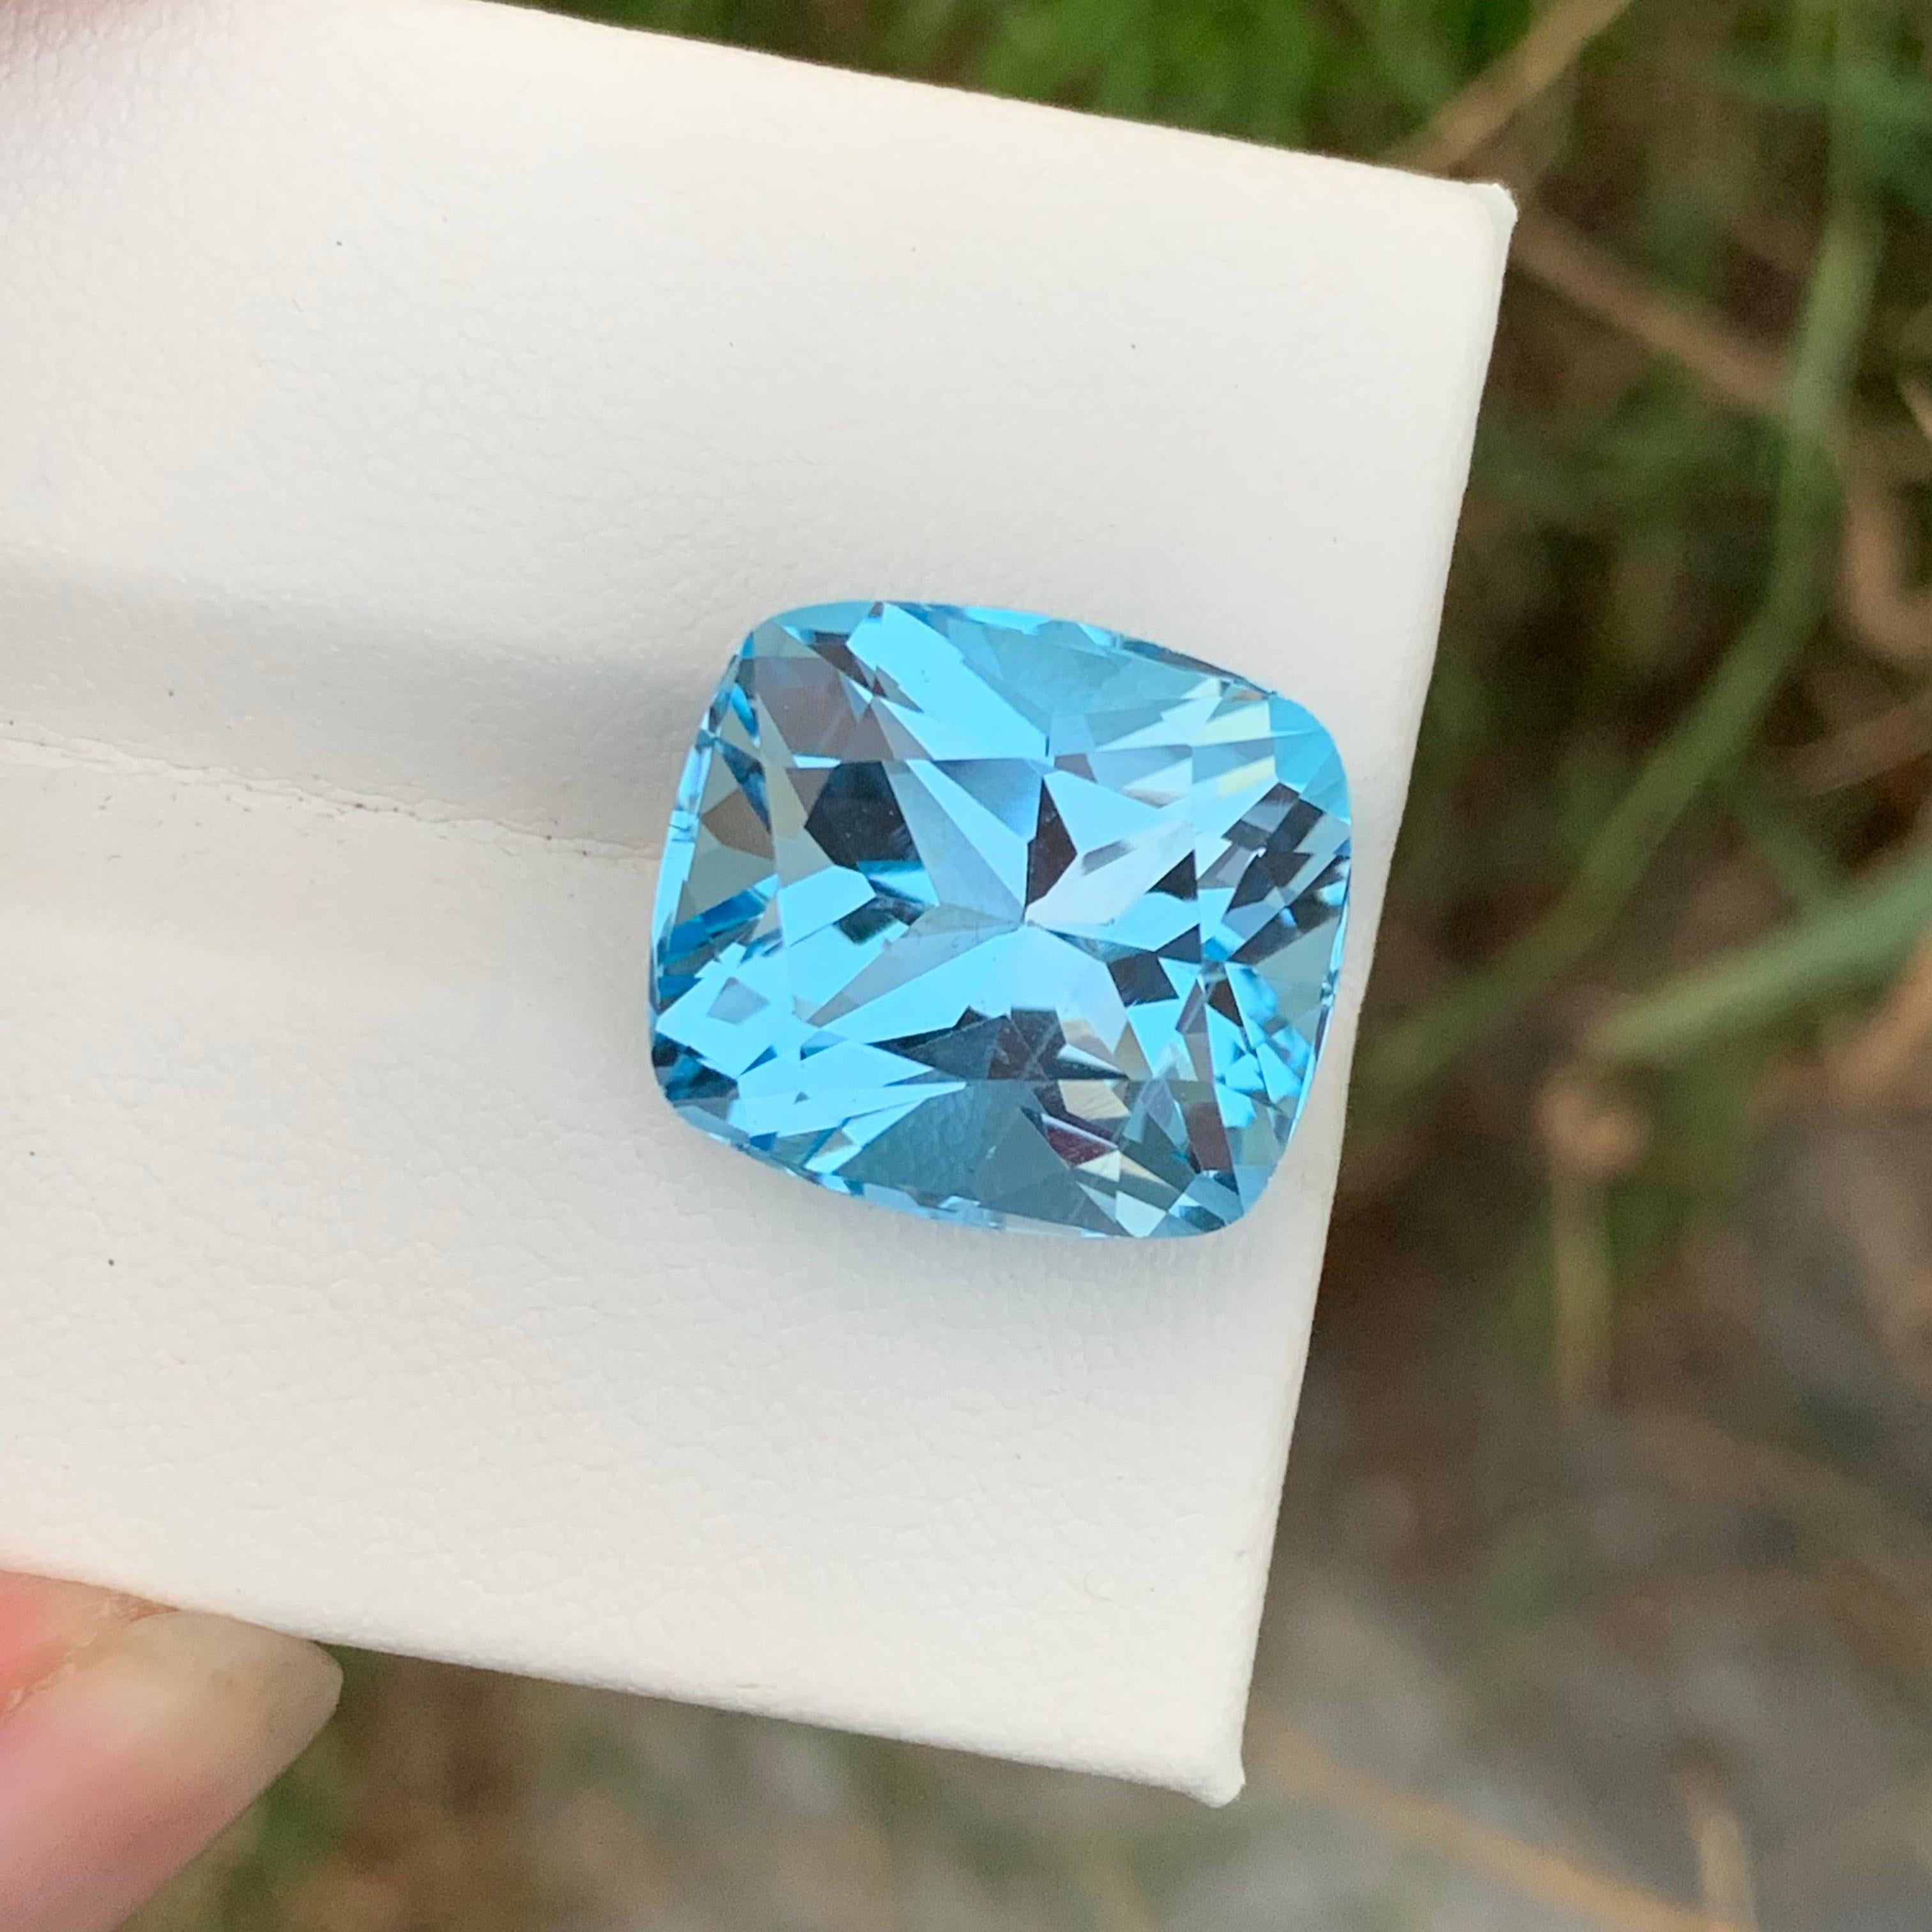 Faceted Sky Blue Topaz 
Weight: 22.25 Carats 
Dimension: 16.4x14.7x11.1 Mm
Origin: Brazil
Color: Blue
Shape: Cushion 
Certificate: On Customer Demand 
.
Sky blue topaz, a serene and captivating gemstone, is known for its soothing blue hue that